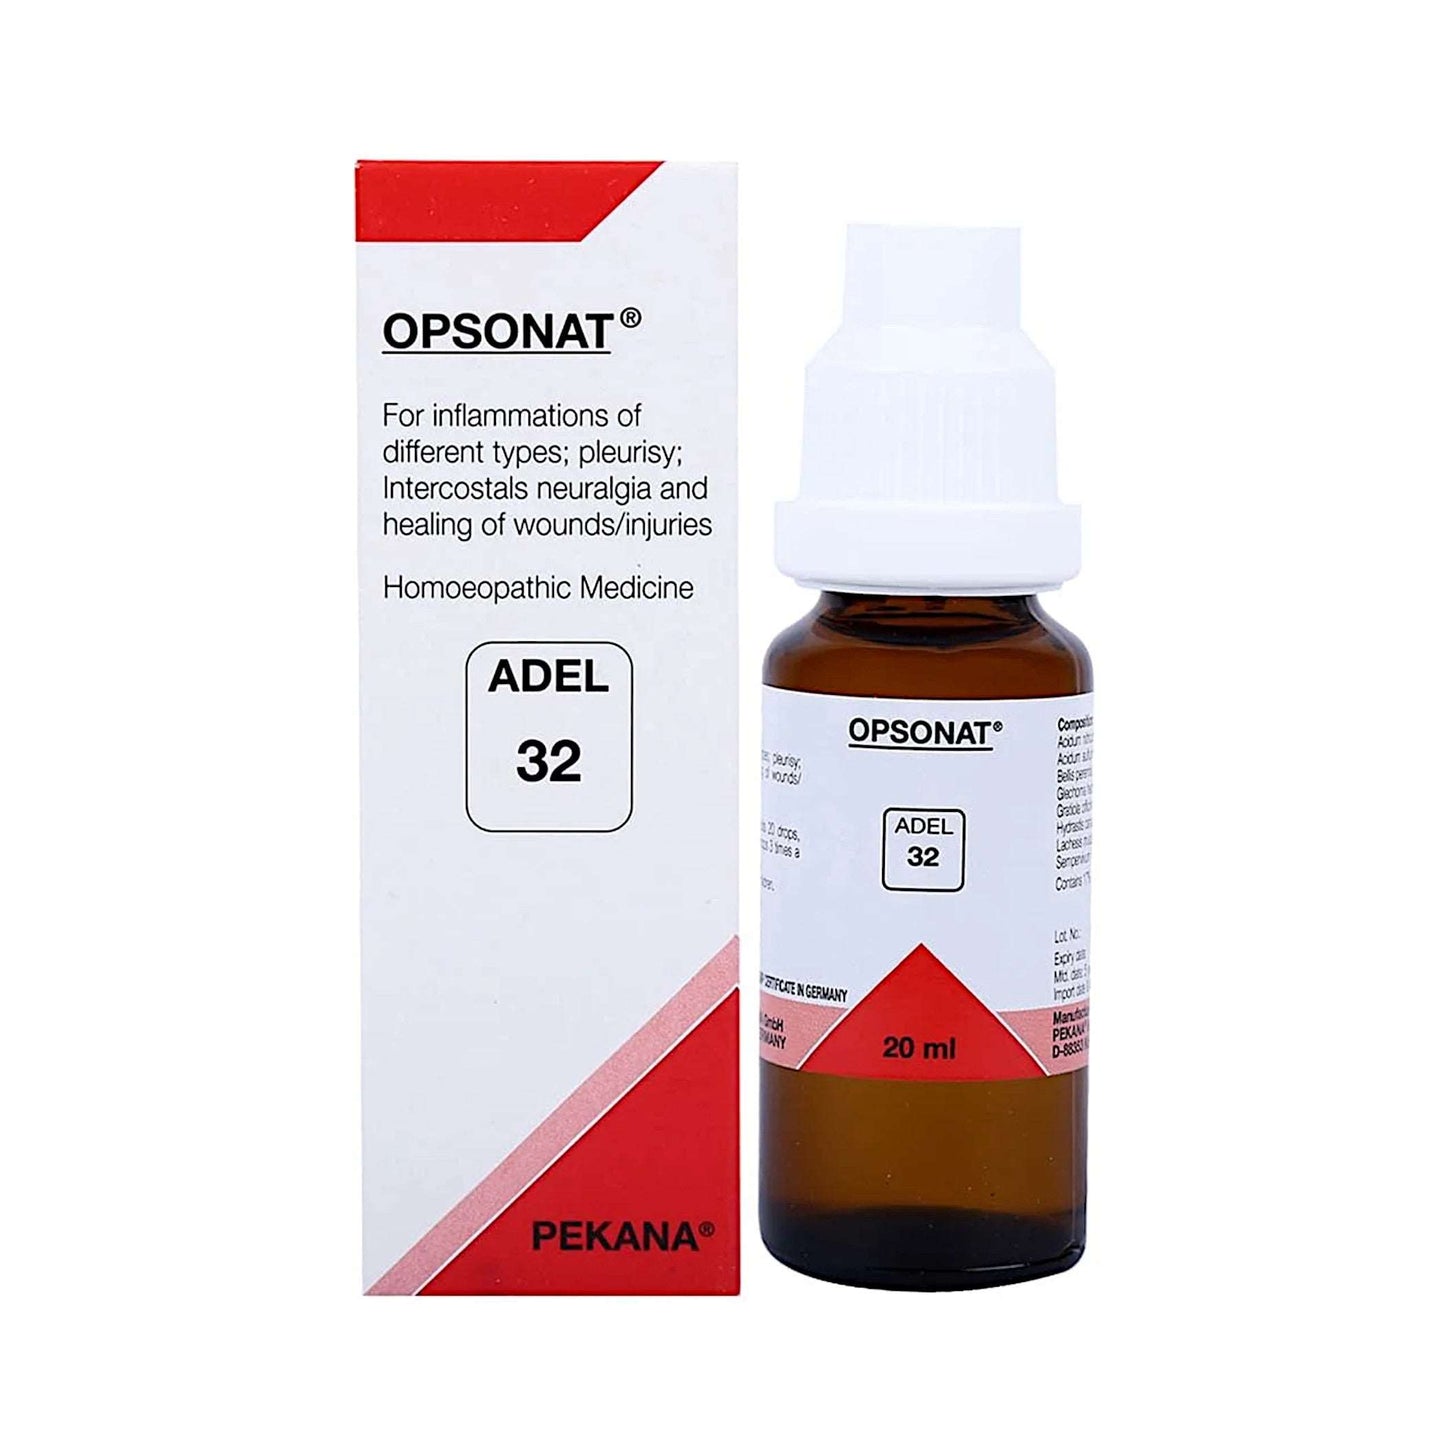 Image: ADEL32 Opsonat Drops 20 ml: Homeopathic Relief for Inflammation and Immune Support.